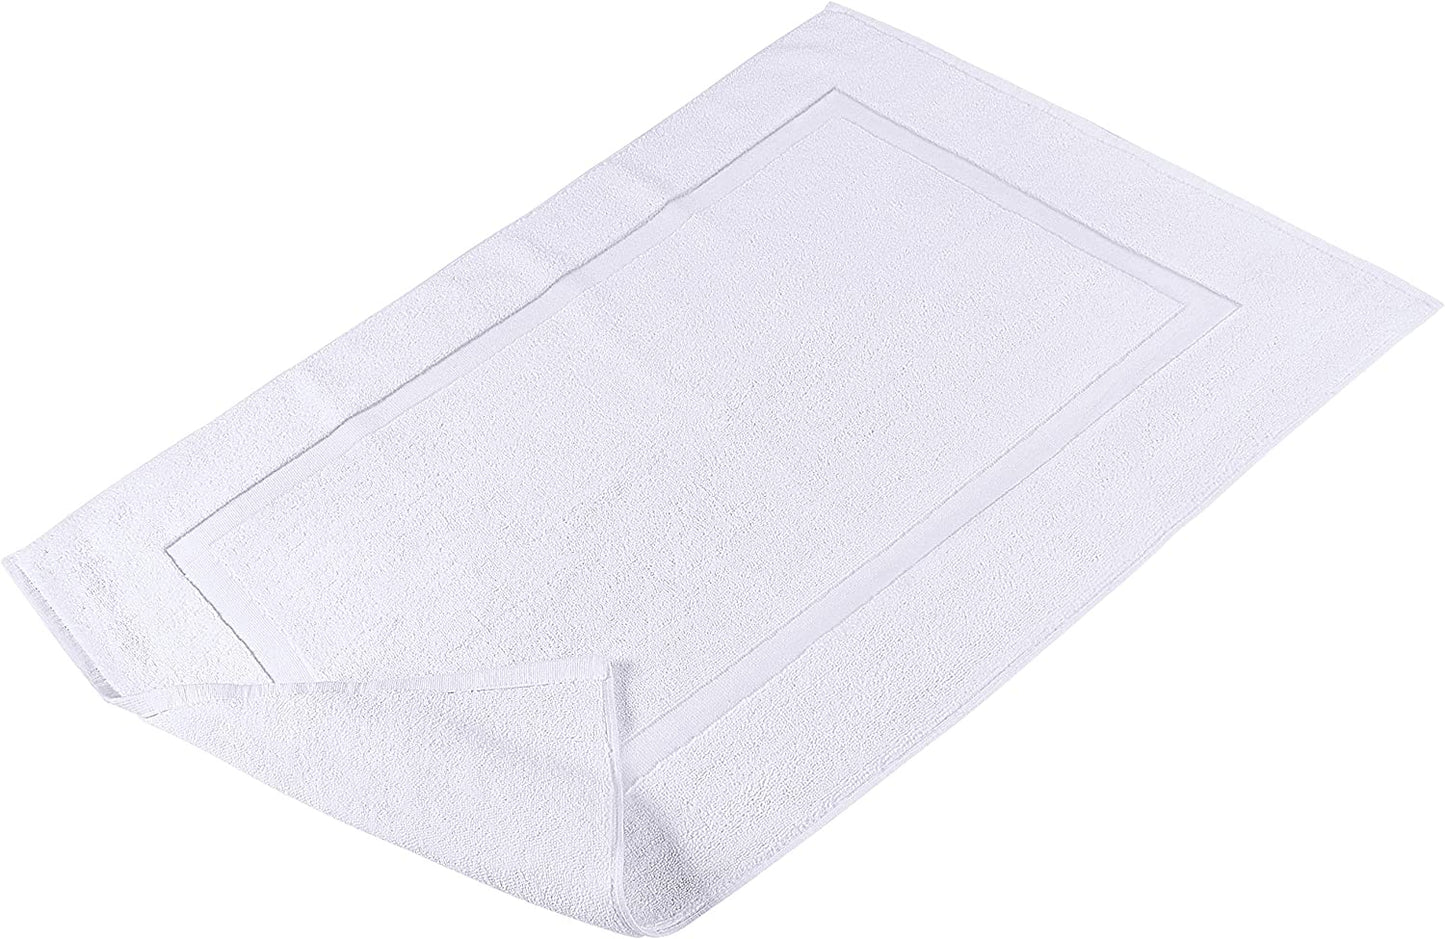 Cotton Banded Bath Mats, White, [Not a Bathroom Rug], 100% Ring-Spun Cotton - Highly Absorbent Shower Bathroom Floor Mat (Pack of 2)